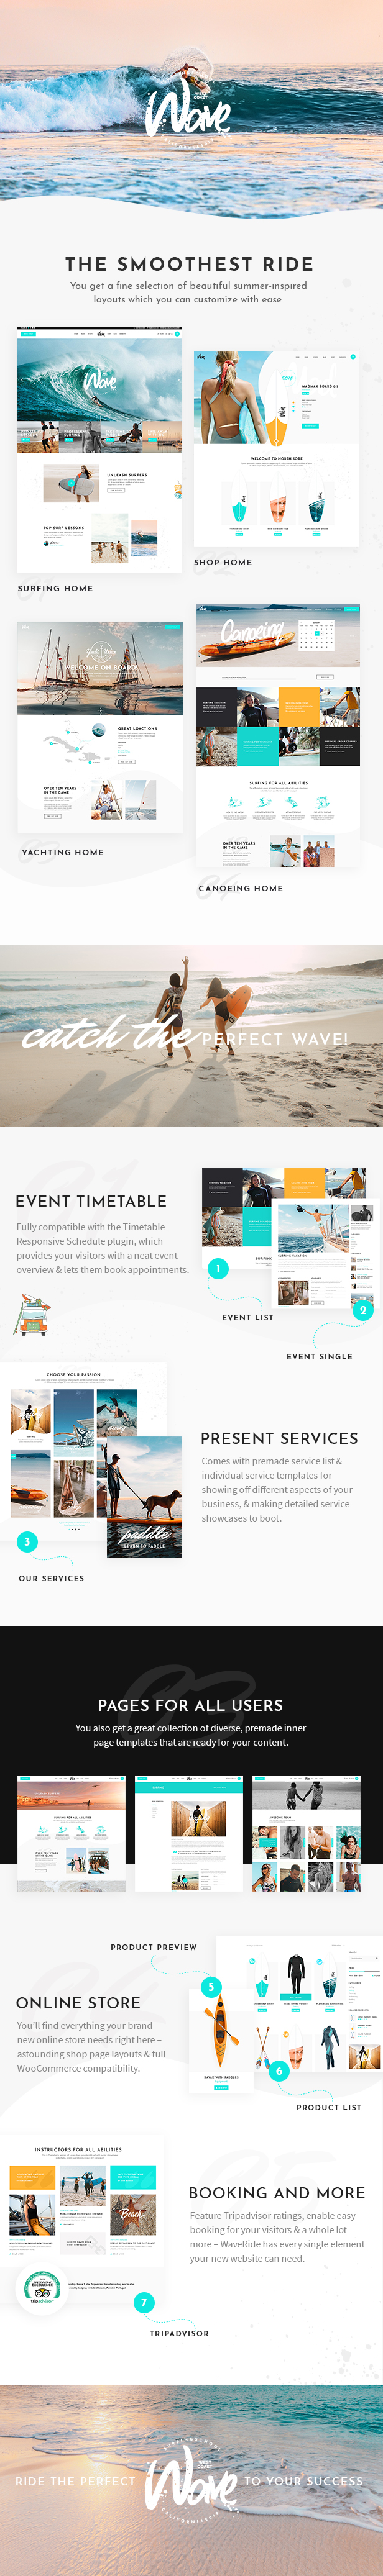 WaveRide - Surfing and Water Sports Theme - 2